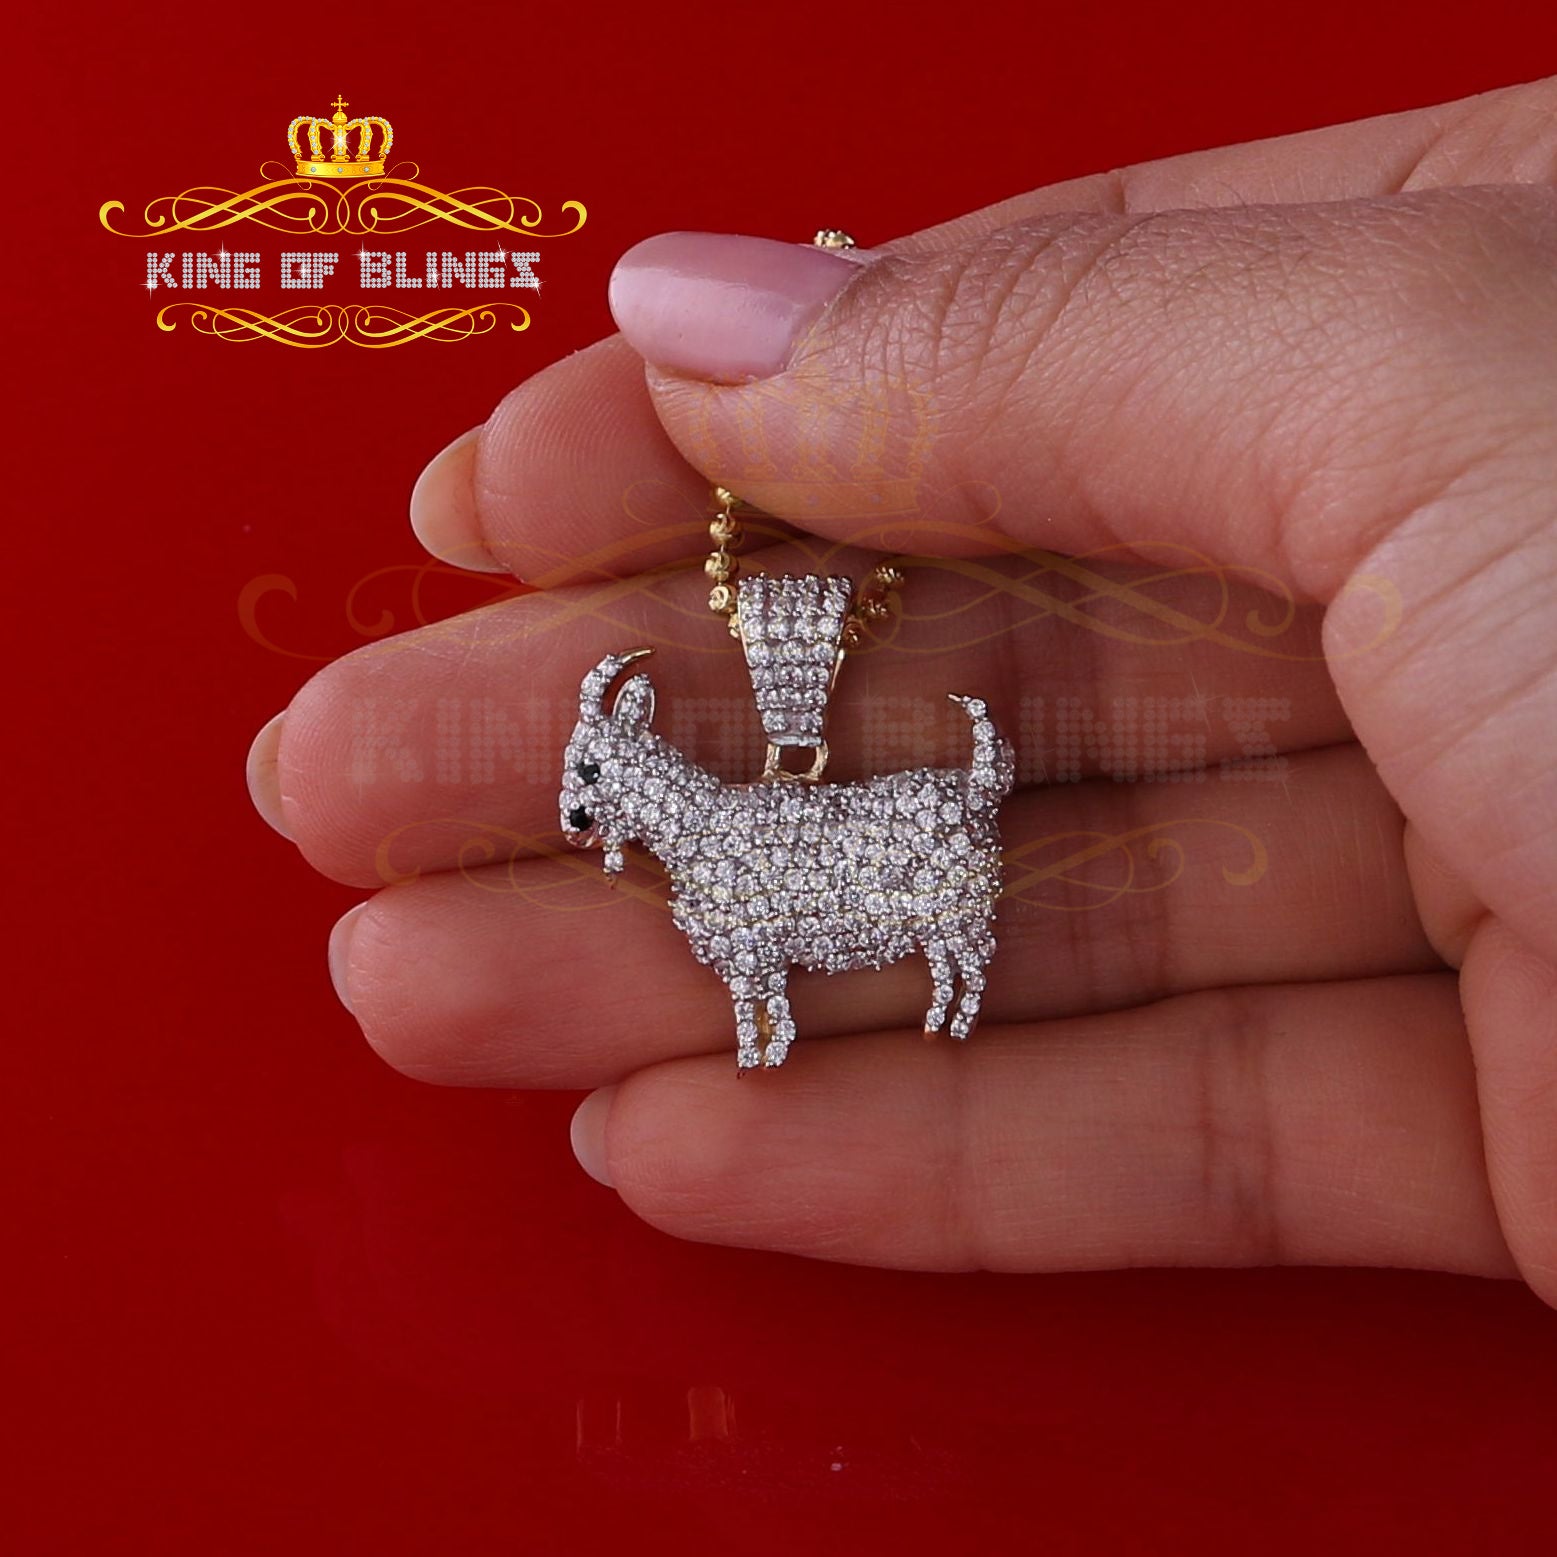 Promising Yellow 925 Sterling Silver Goat Shape Pendant 3.82ct Cubic Zirconia KING OF BLINGS